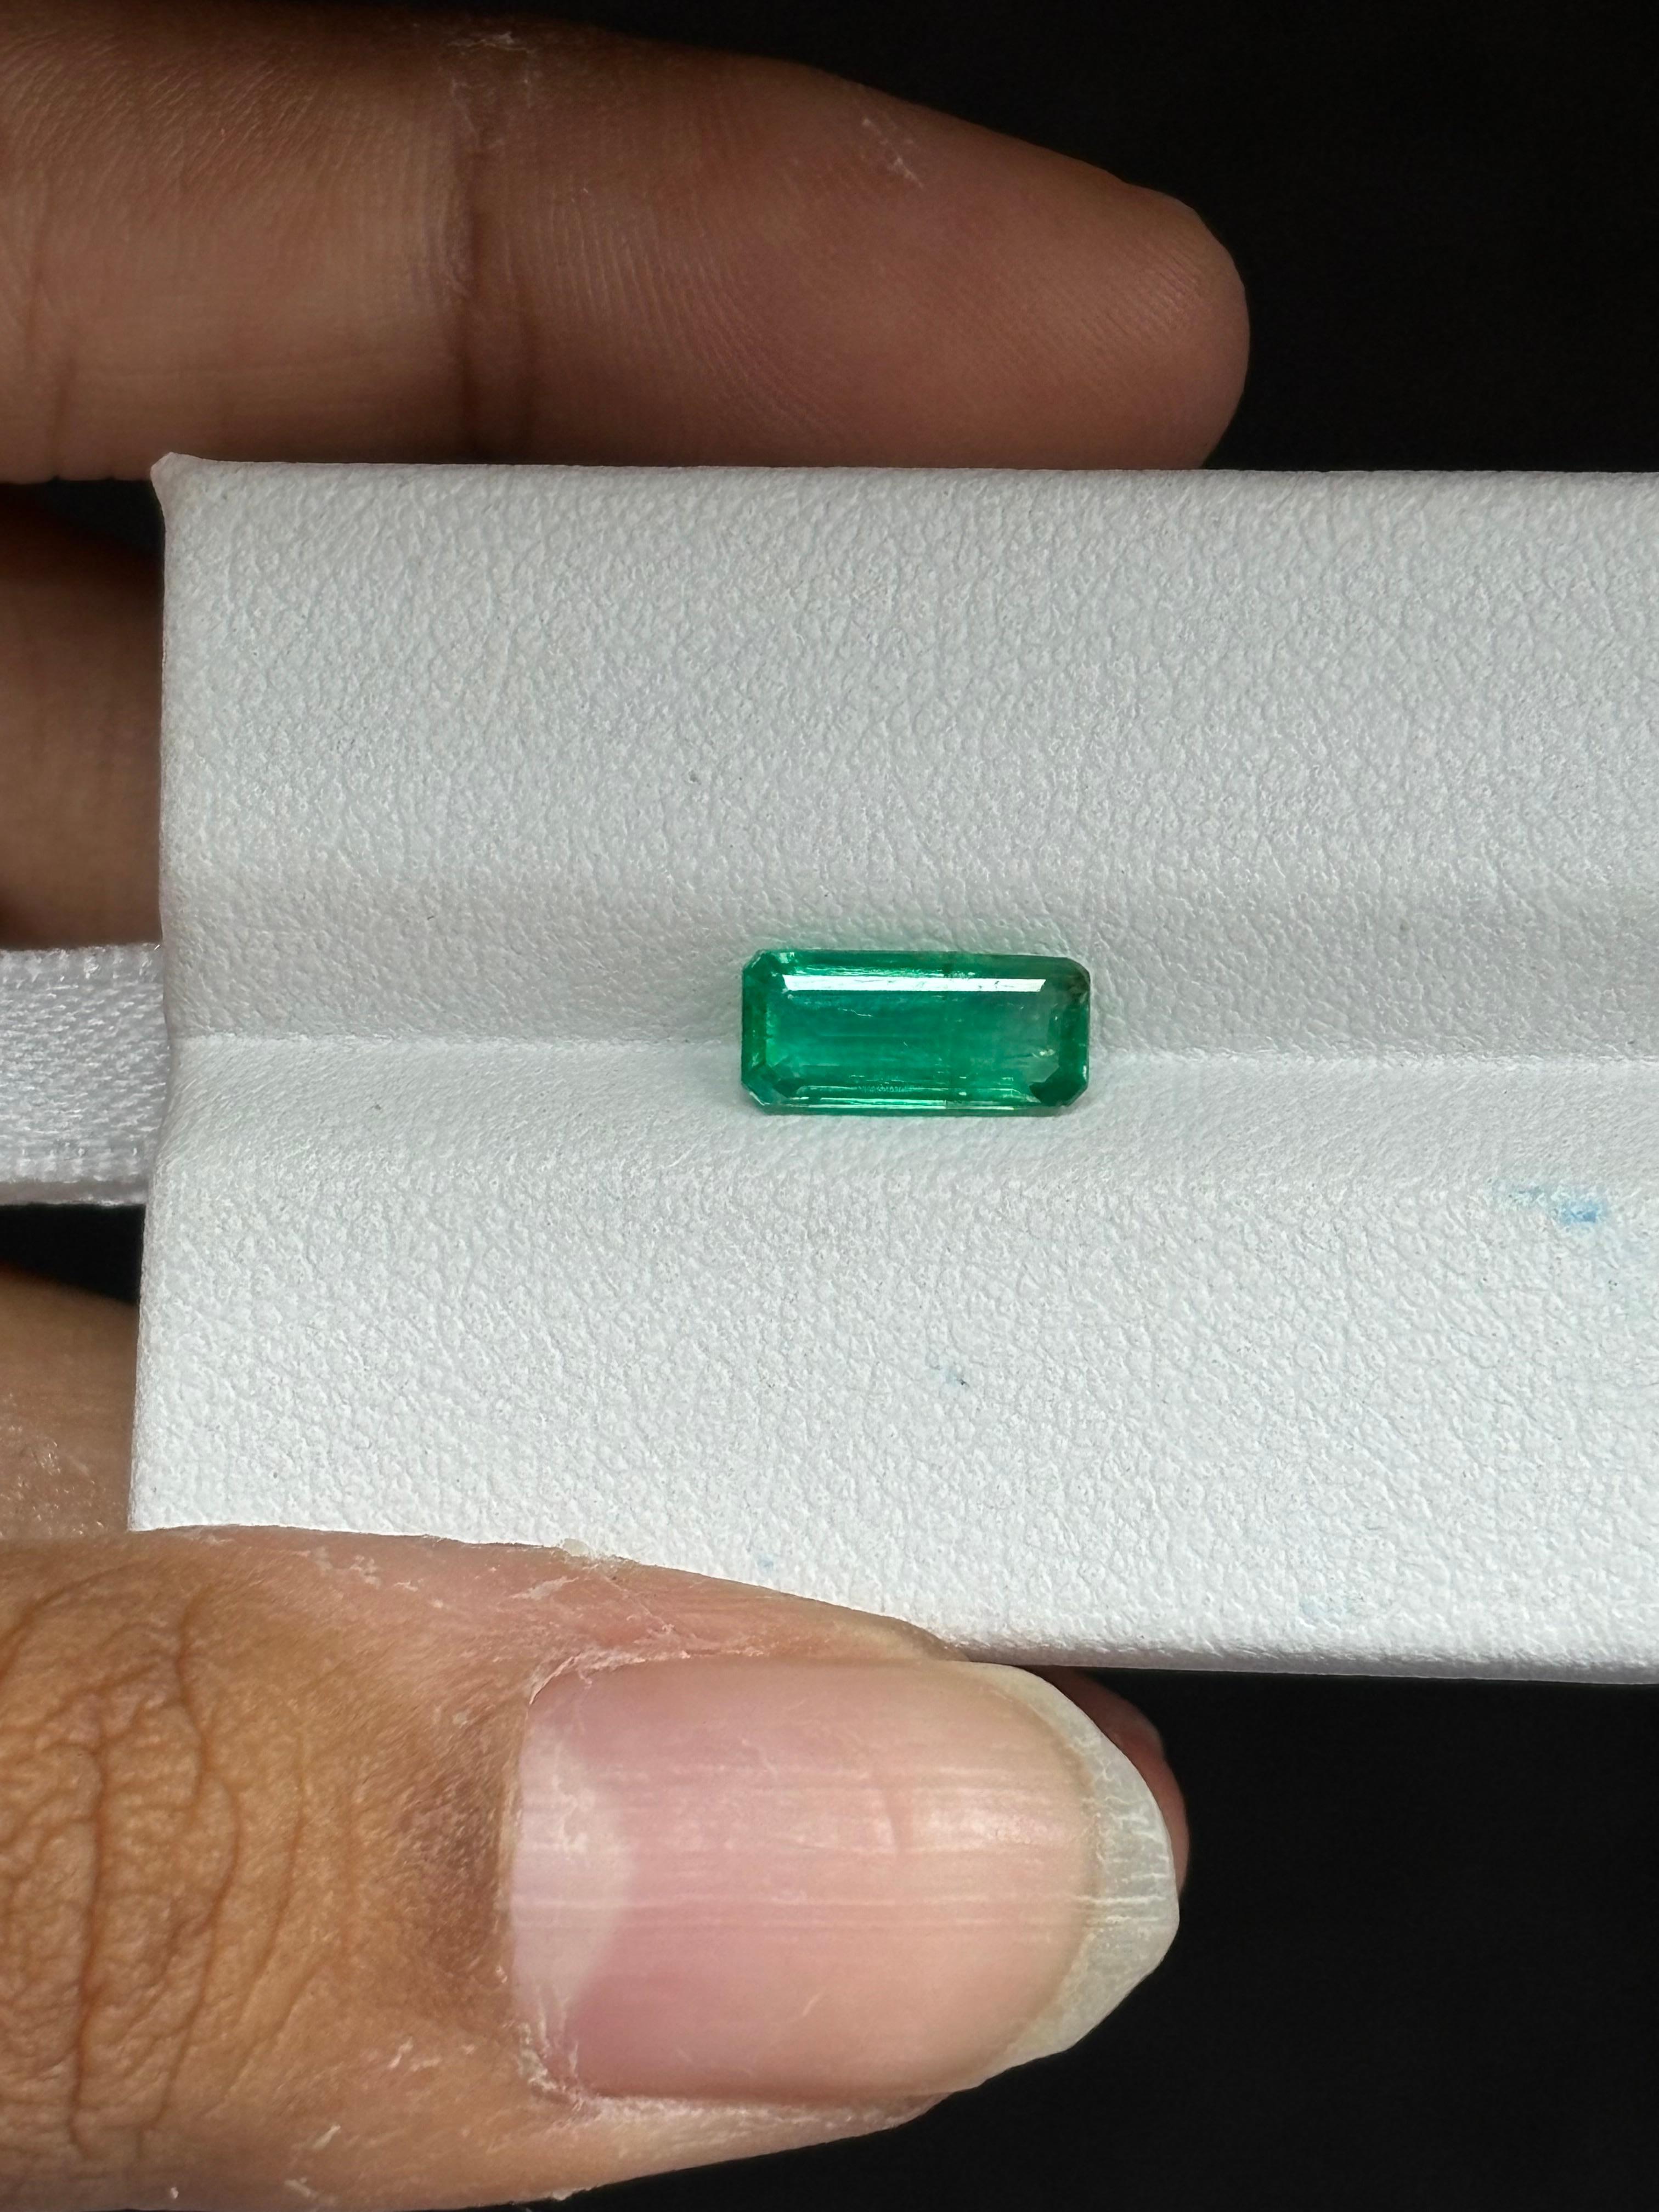 A stunning 1.10 Carat Emerald stone that is a gorgeous shade of vivid green and is a panjshir Emerald. It is completely natural and of good quality. The emerald piece is cut into perfection in an elongated emerald-cut shape.

The green emerald has